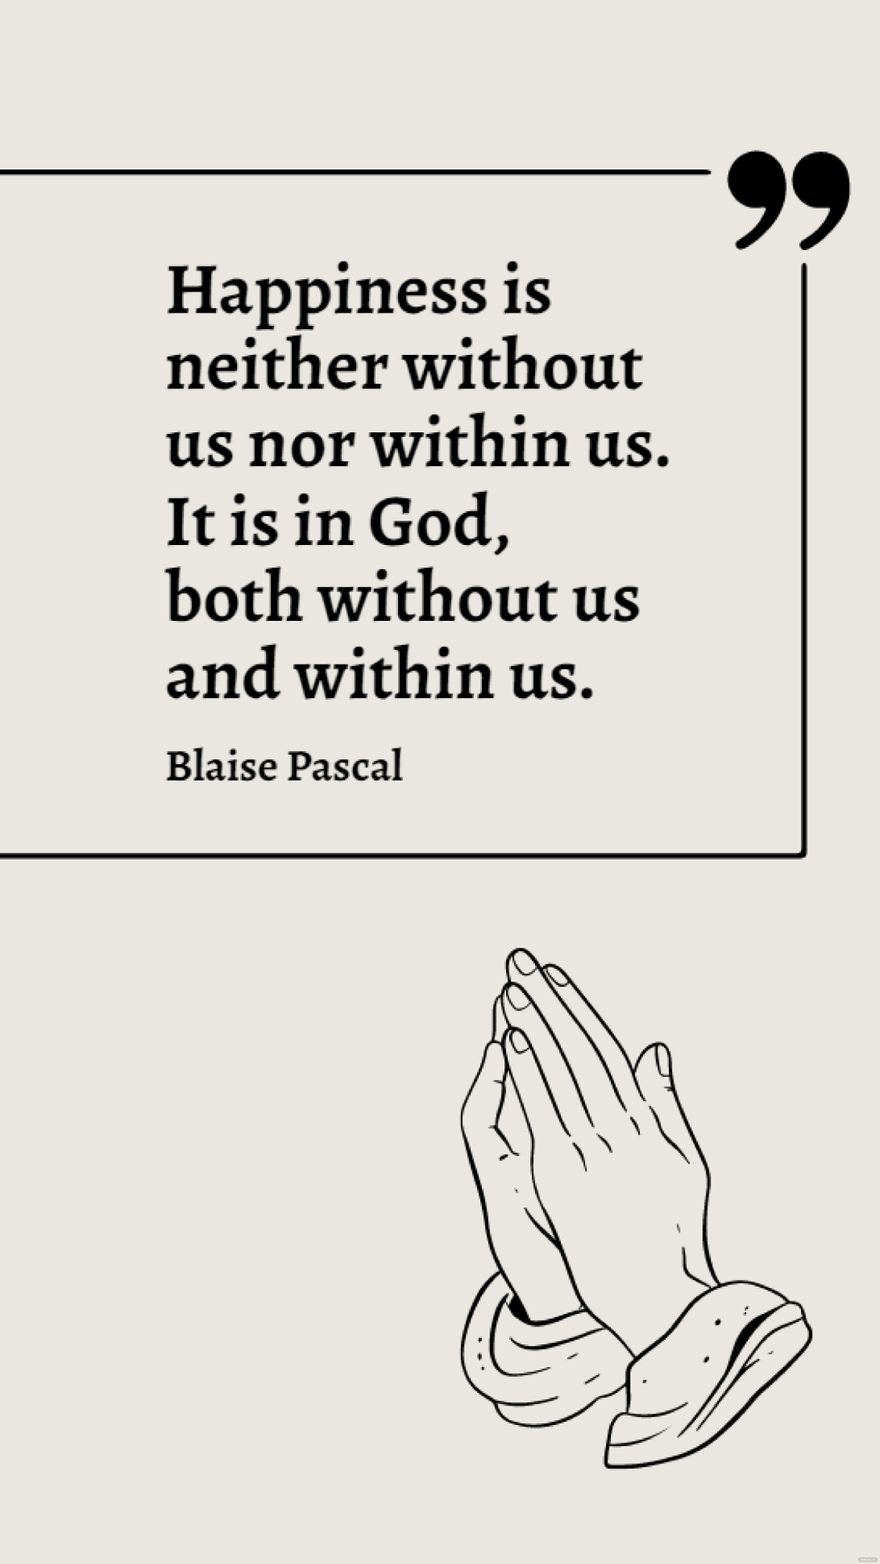 Blaise Pascal - Happiness is neither without us nor within us. It is in God, both without us and within us.